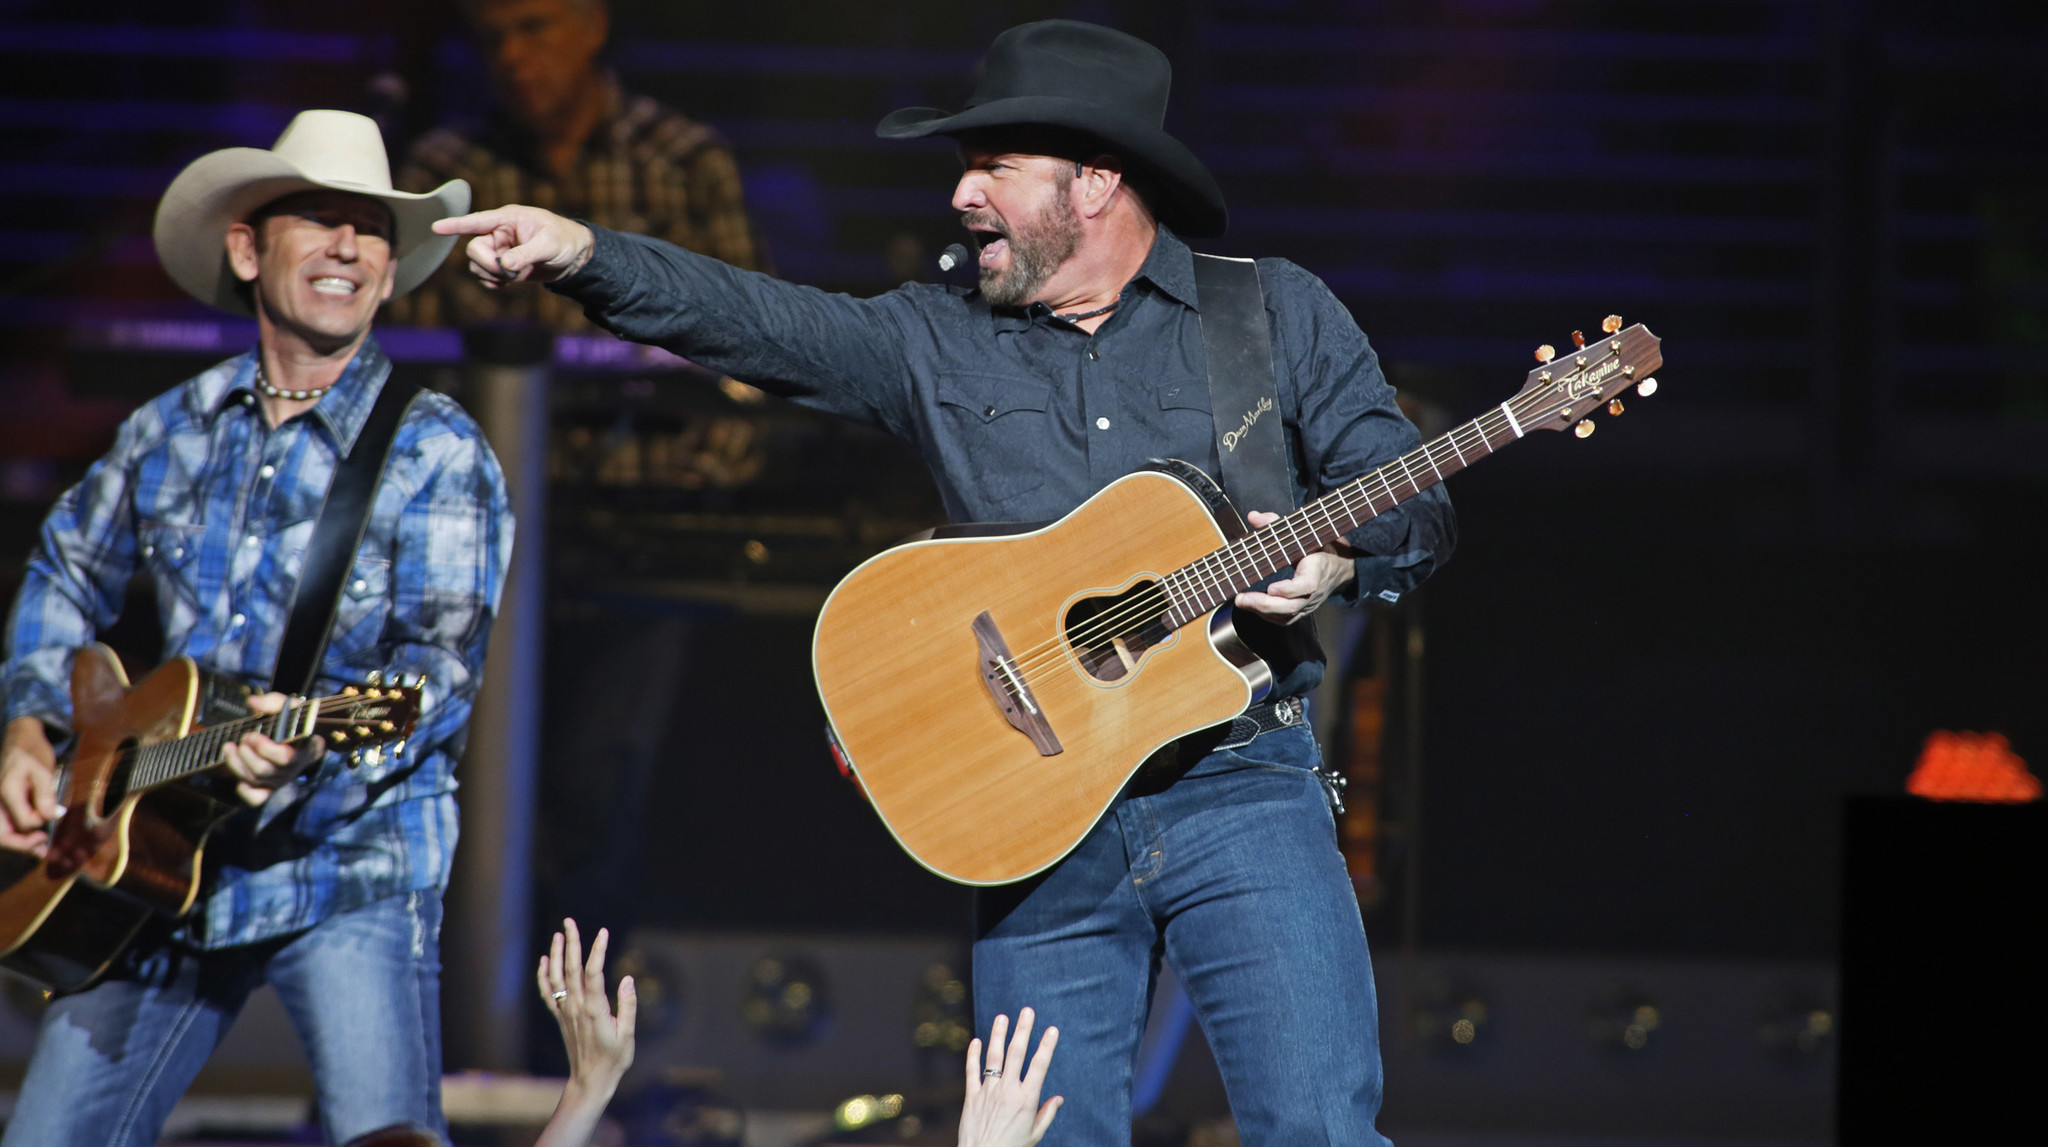 REVIEW: Garth Brooks gives audience what it wants, but nothing ... - Allentown Morning Call